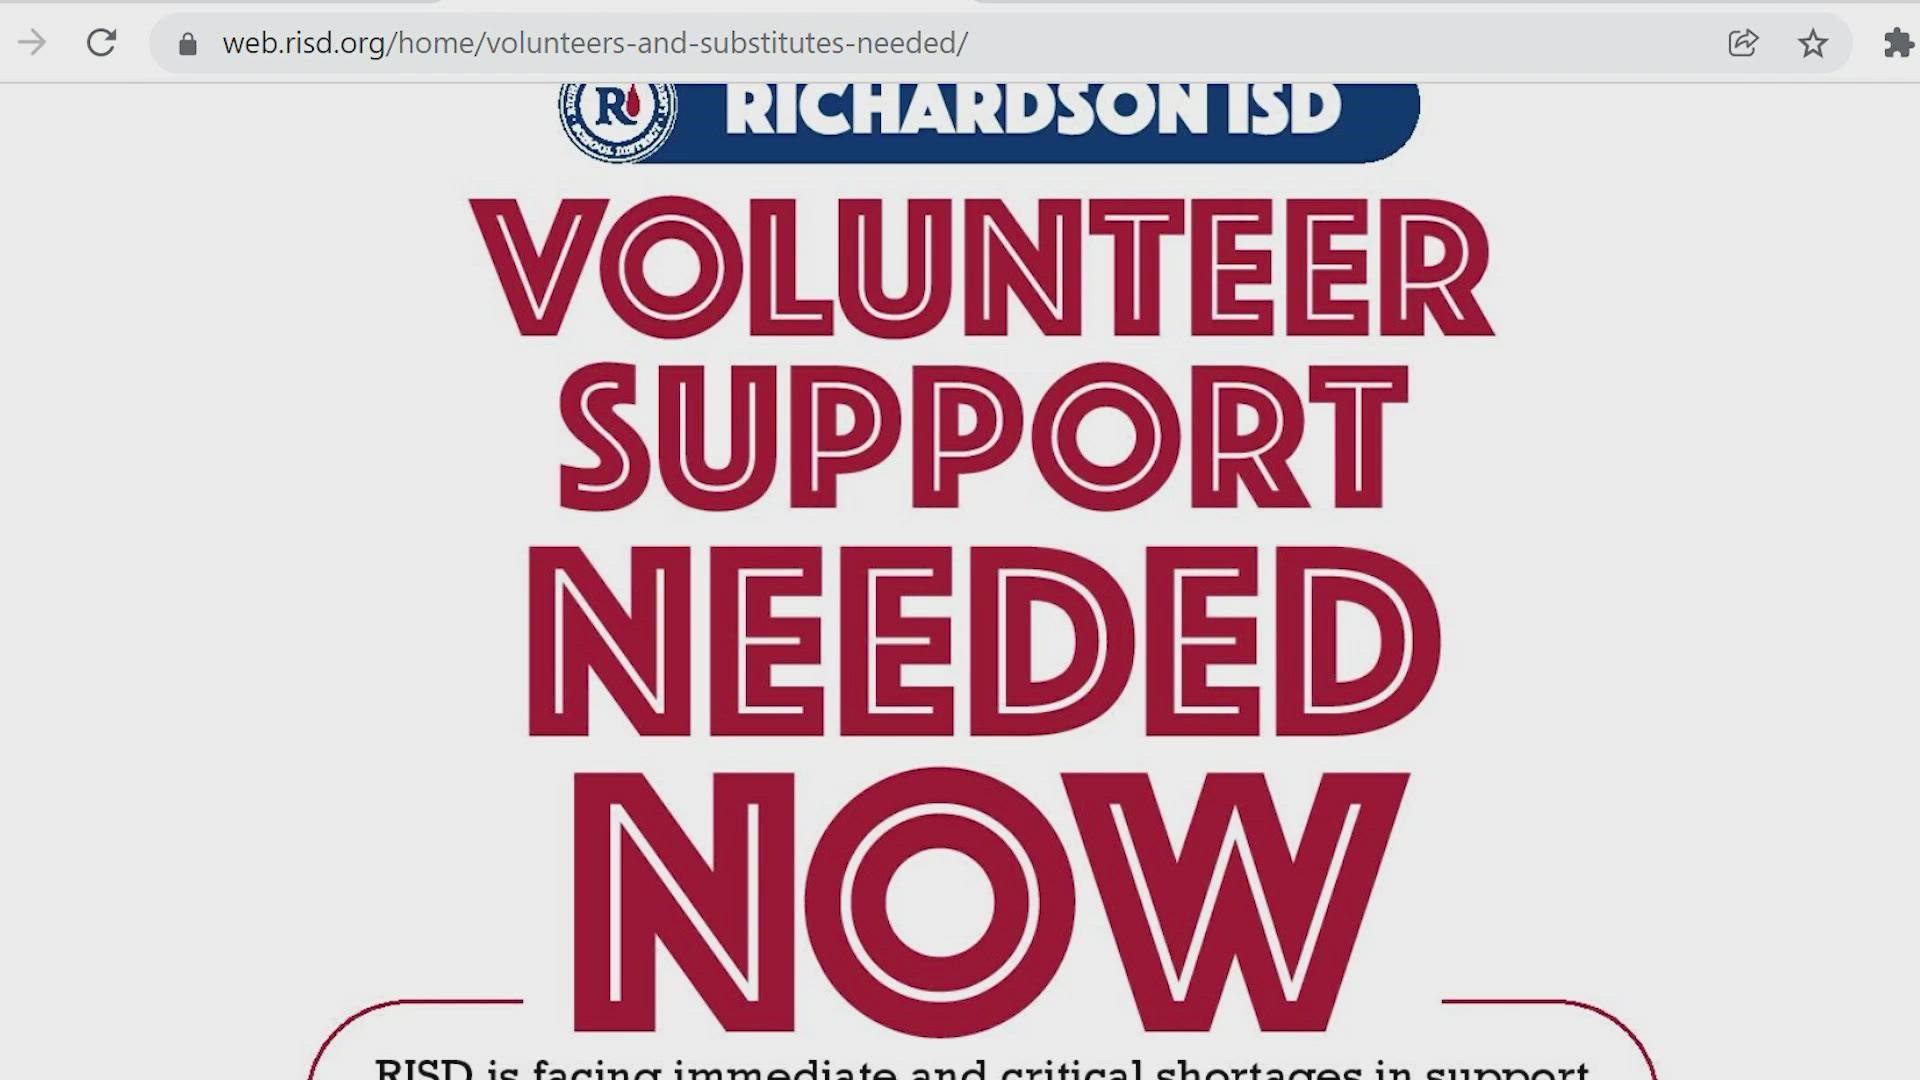 Richardson ISD is asking parents to consider being volunteers at schools and they aren't the only ones struggling to figure out how to keep classes going.